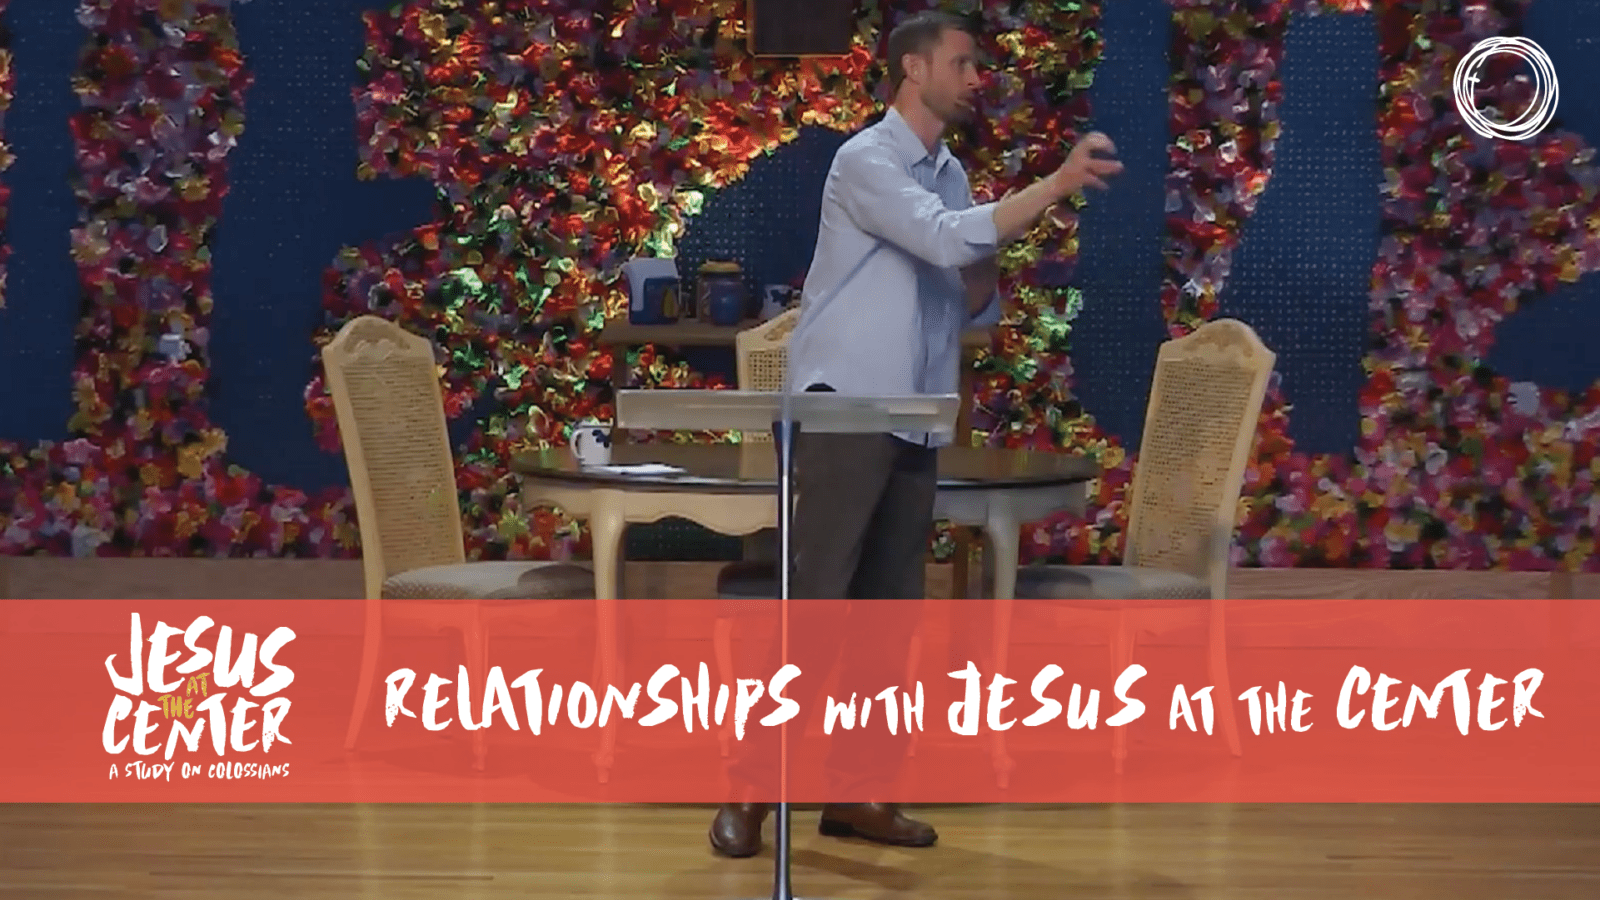 Relationships with Jesus at the Center